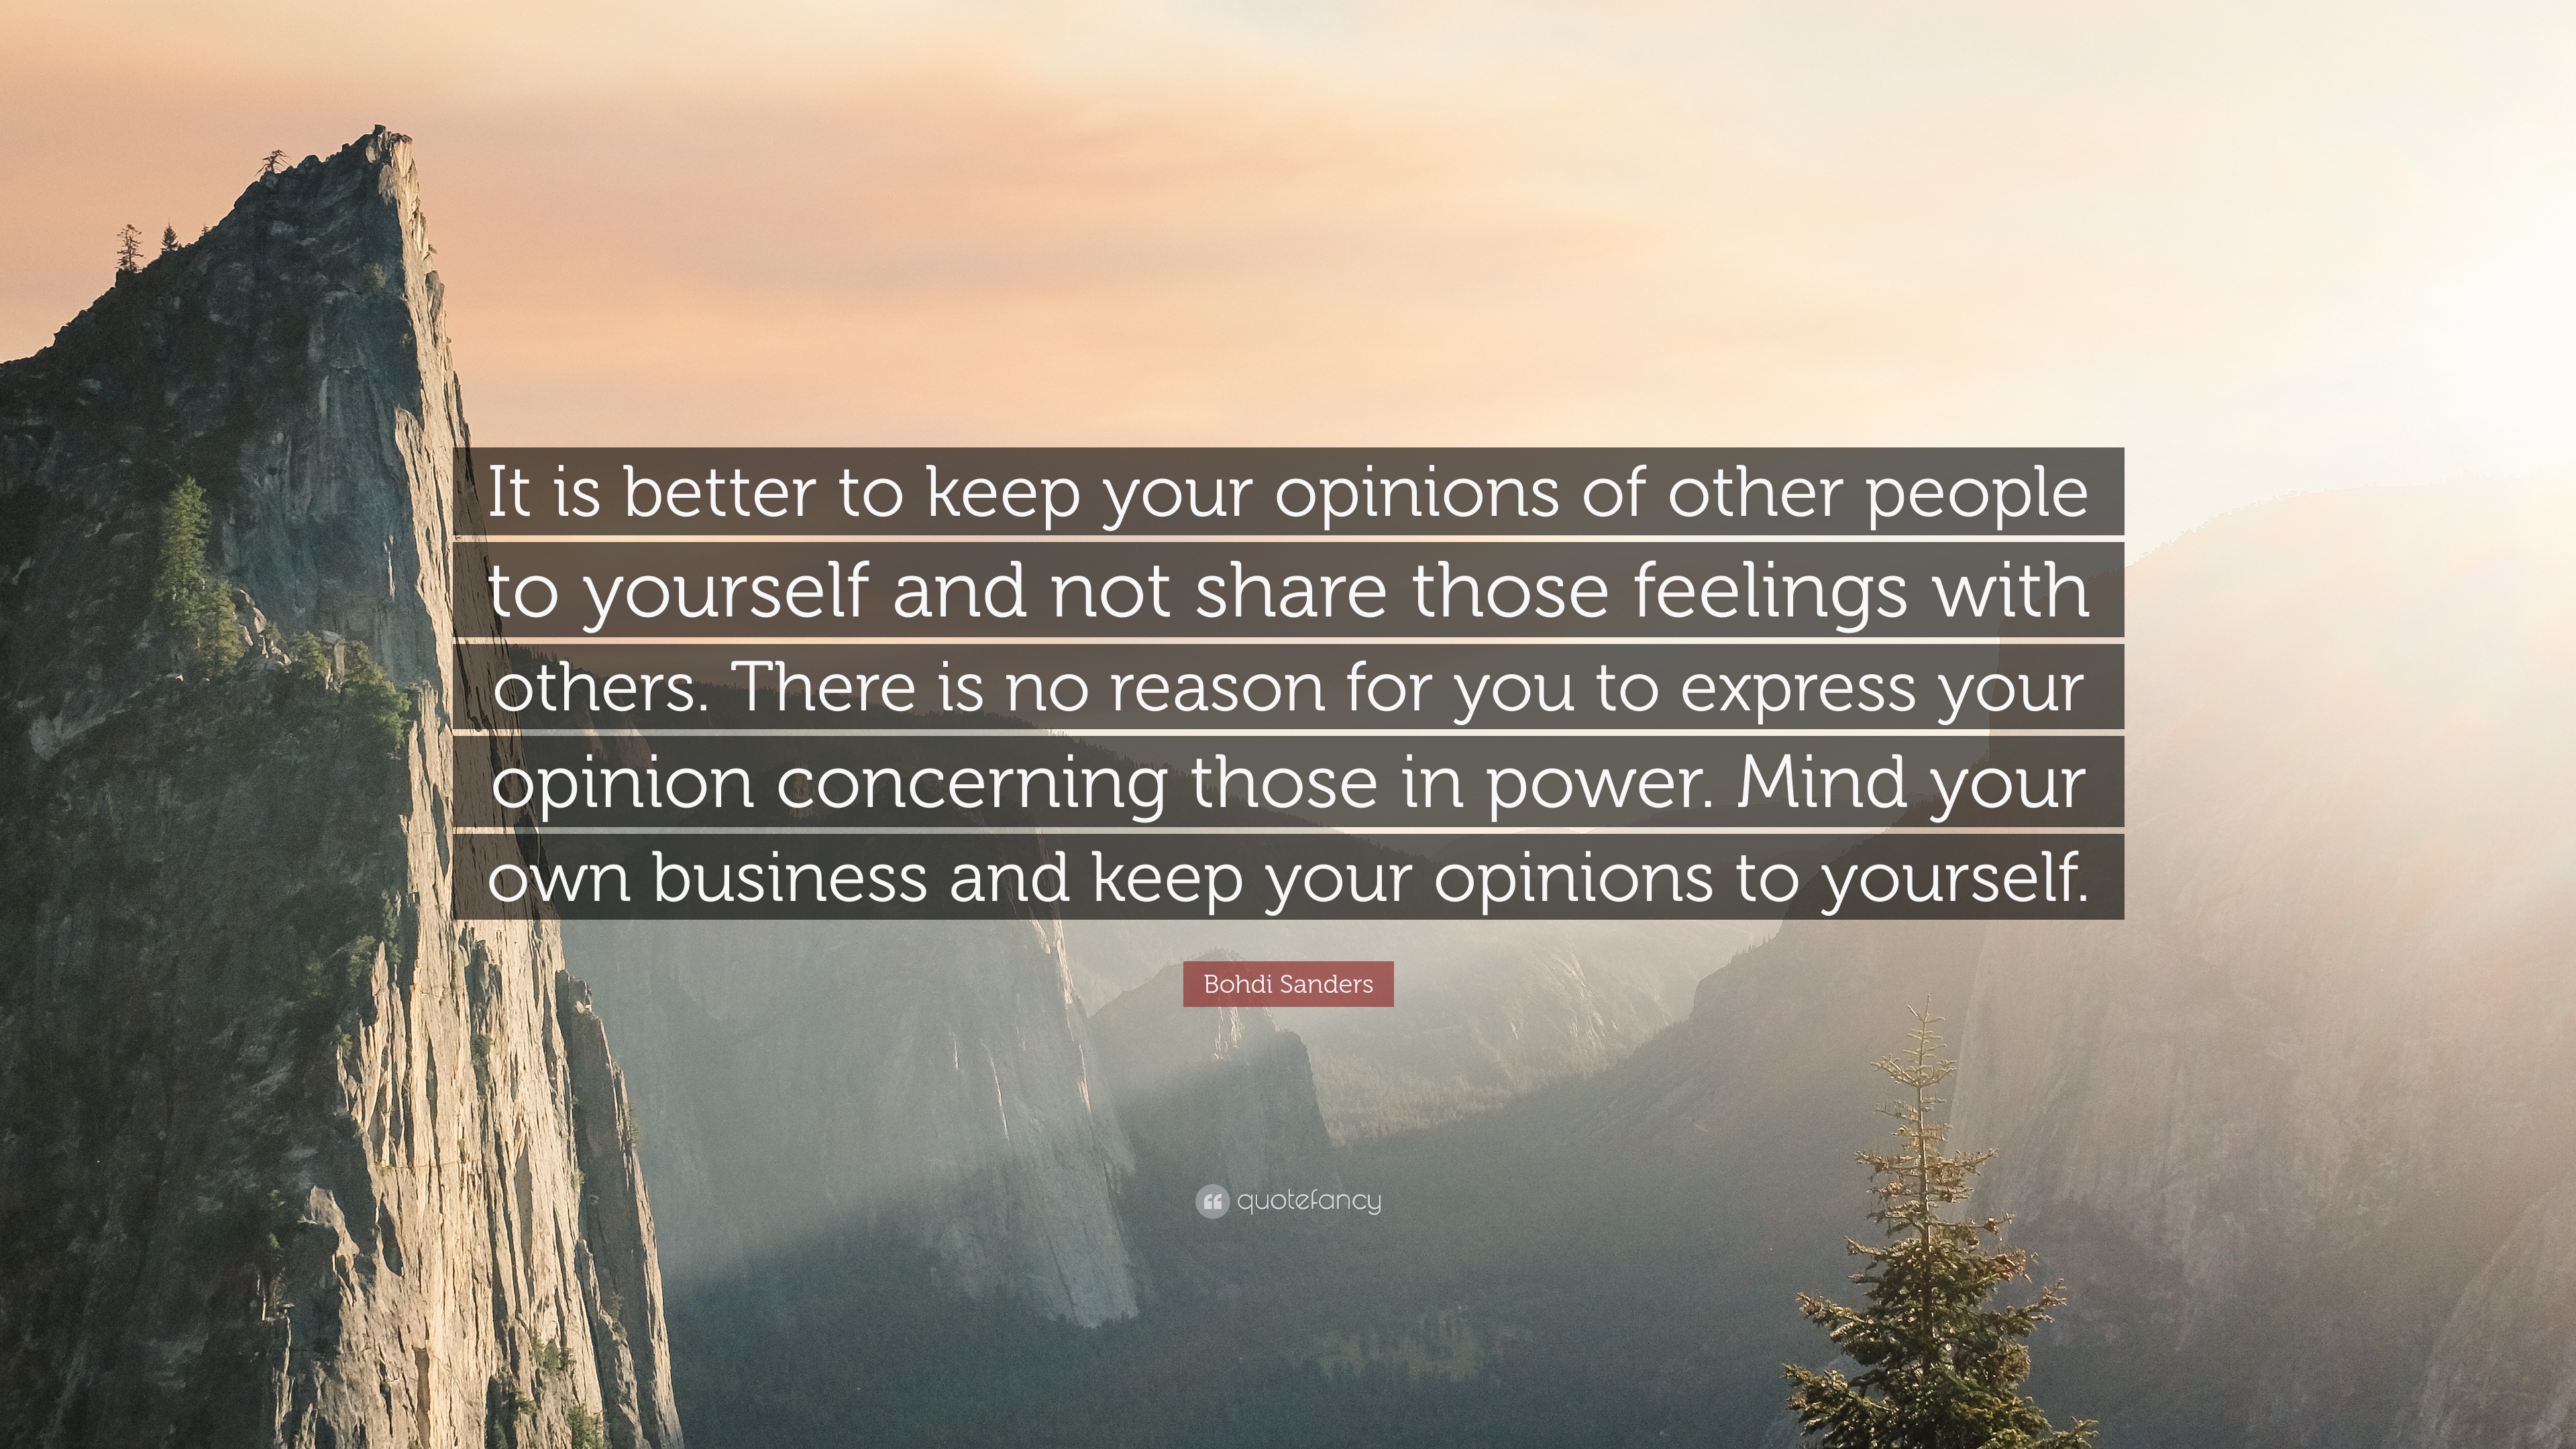 Bohdi Sanders Quote “it Is Better To Keep Your Opinions Of Other People To Yourself And Not